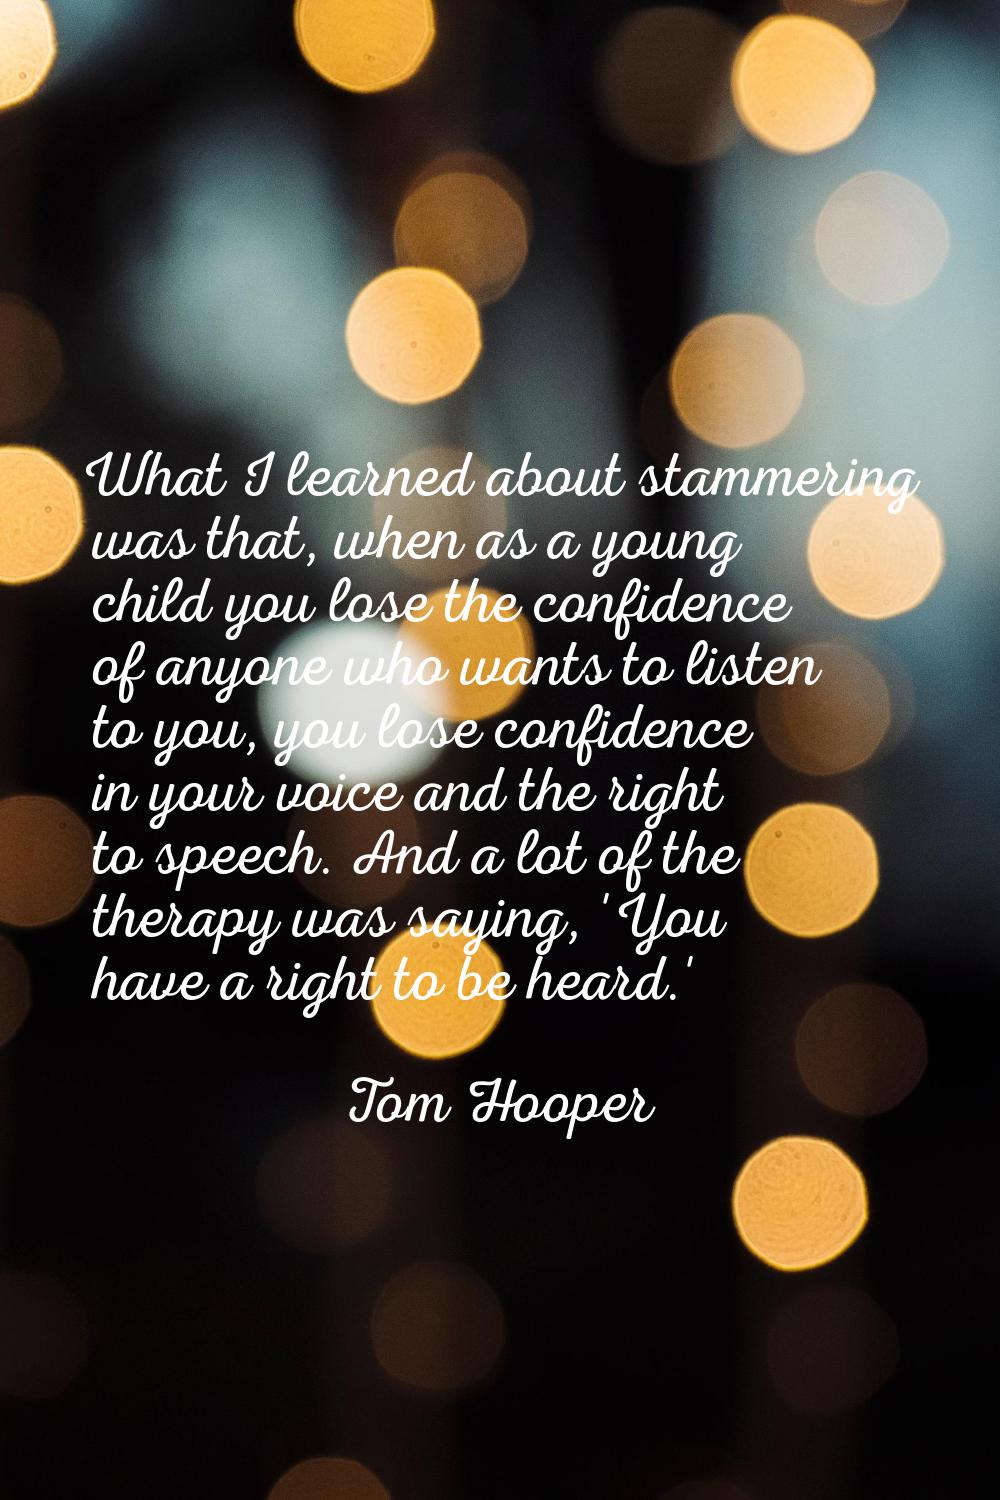 What I learned about stammering was that, when as a young child you lose the confidence of anyone w